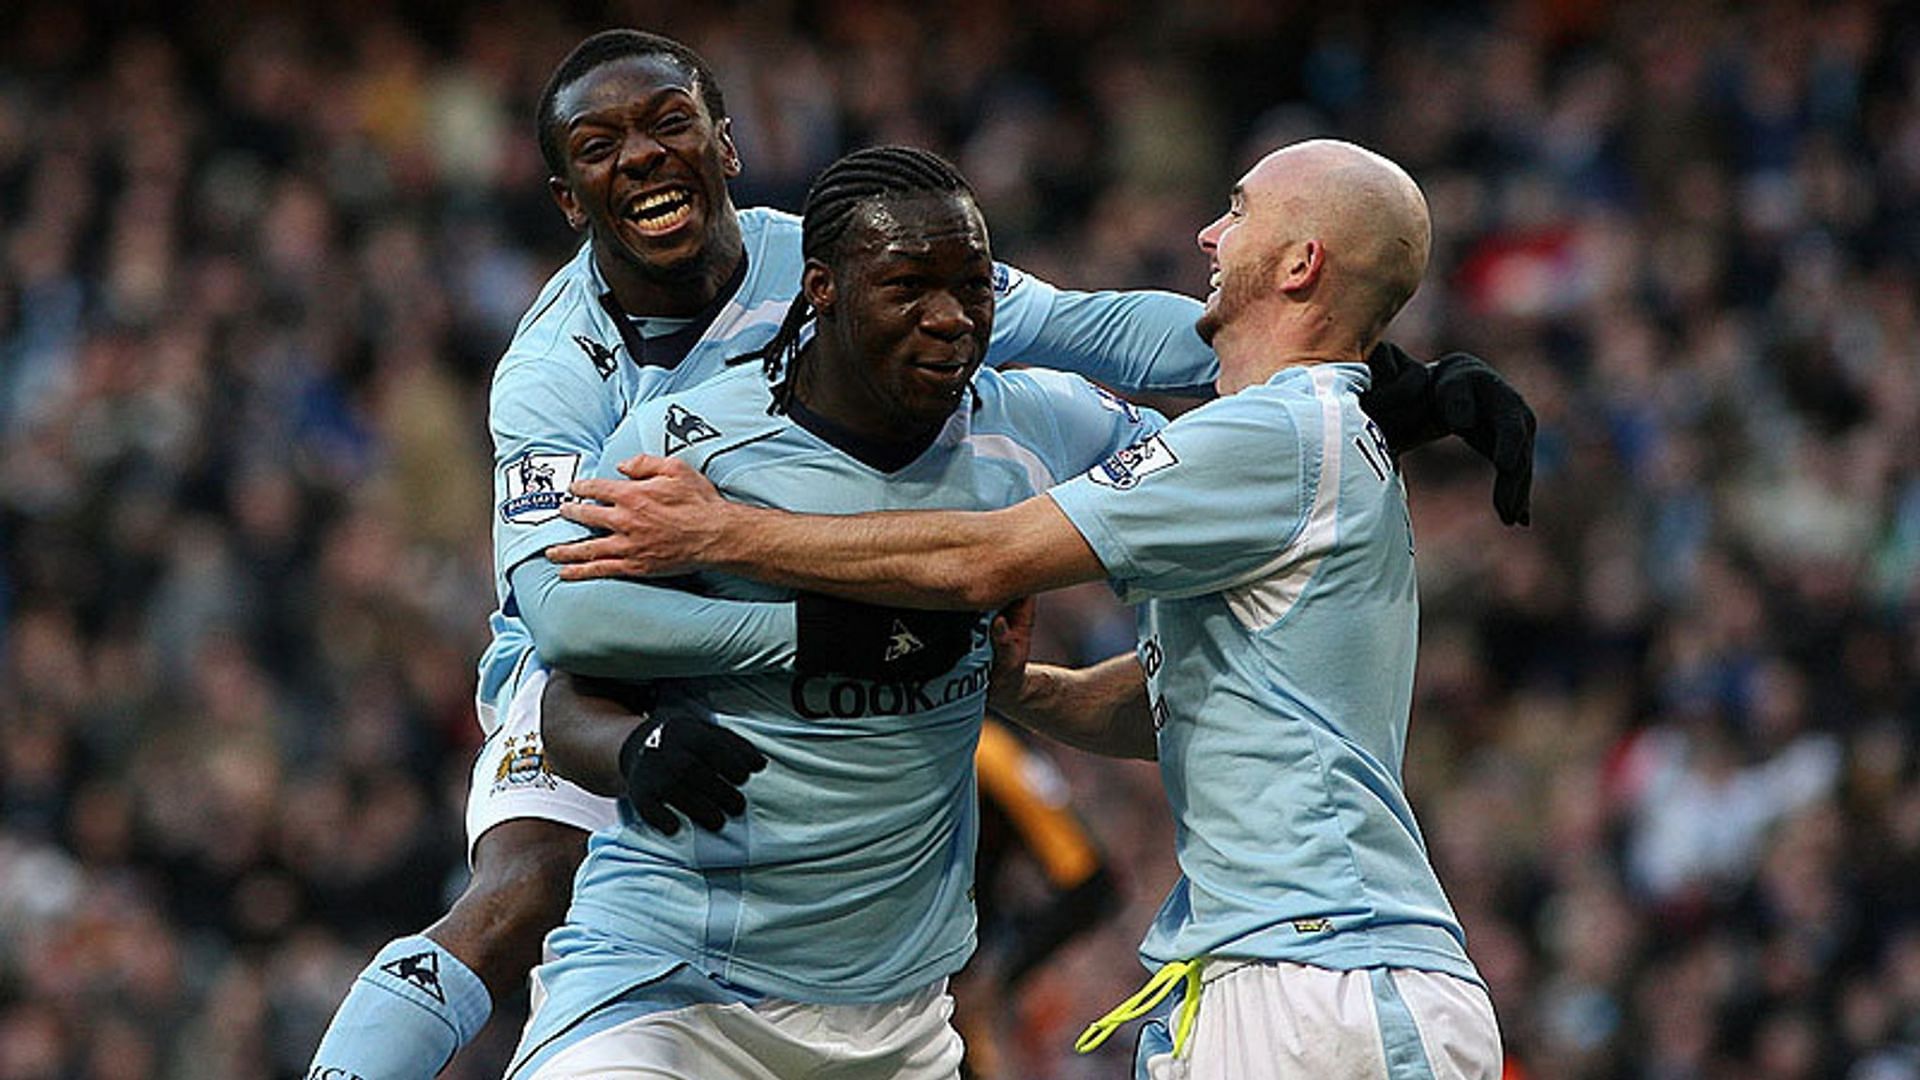 A freshly-taken-over Manchester City showed early signs of dominance with a thumping 5-1 win.